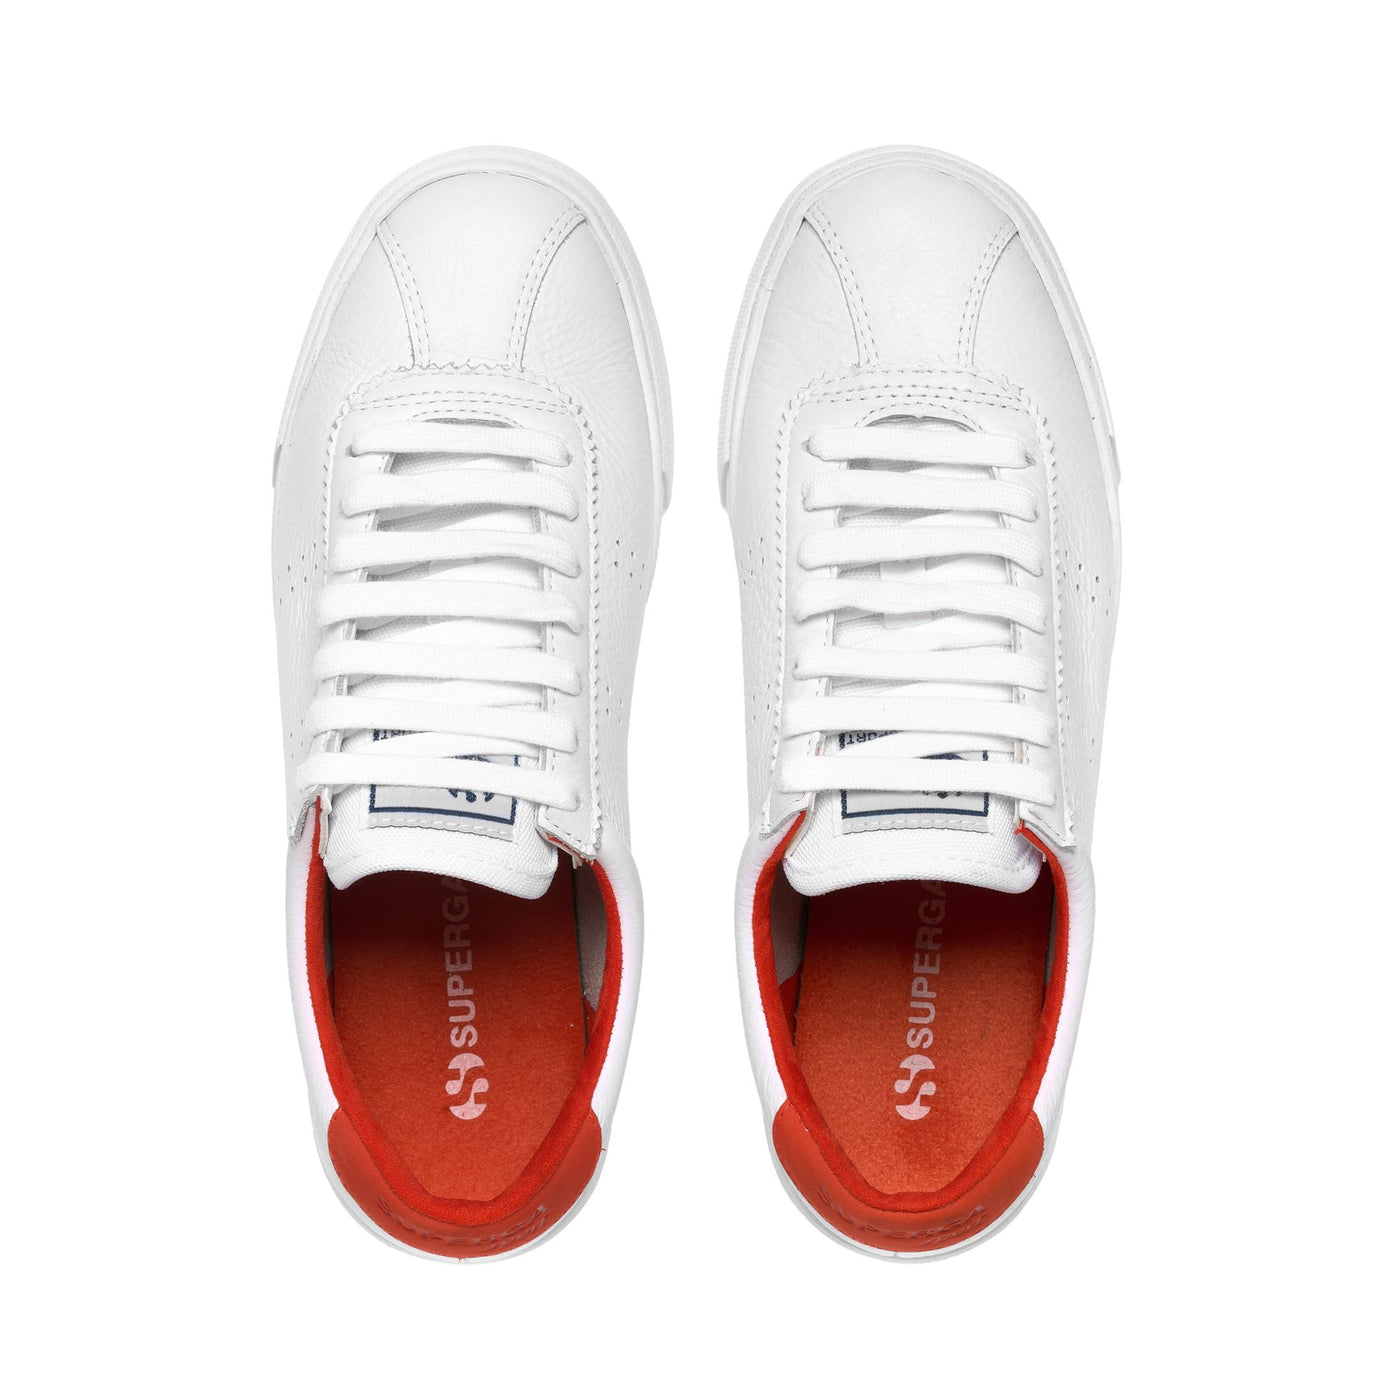 Sneakers Unisex 2843 CLUB S COMFORT LEATHER Low Cut WHITE-RED | superga Dressed Back (jpg Rgb)		